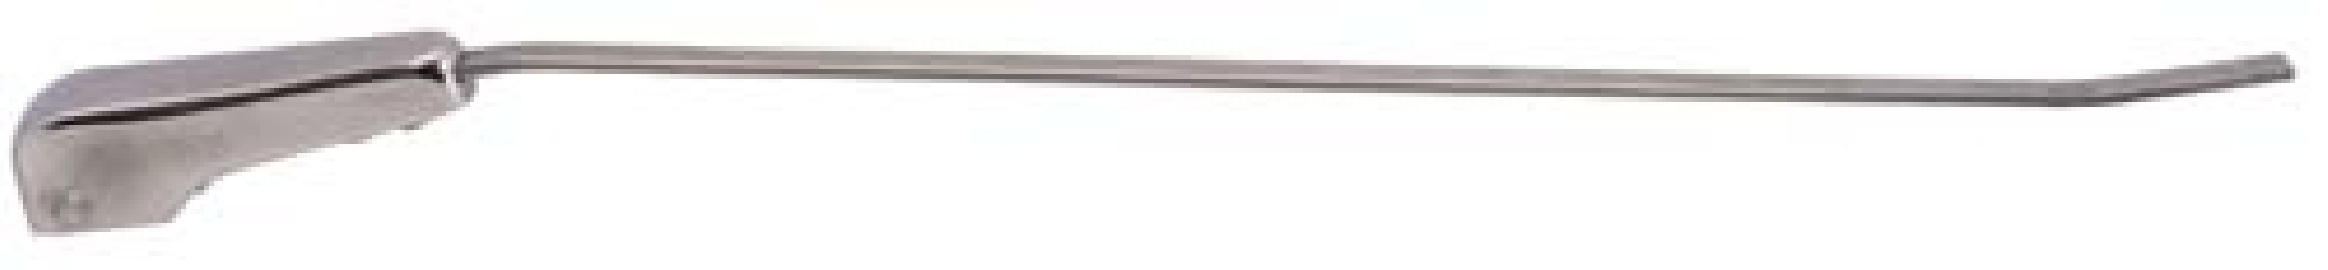 Wiper arm, T2  65 Polished Stainless Steel, Each